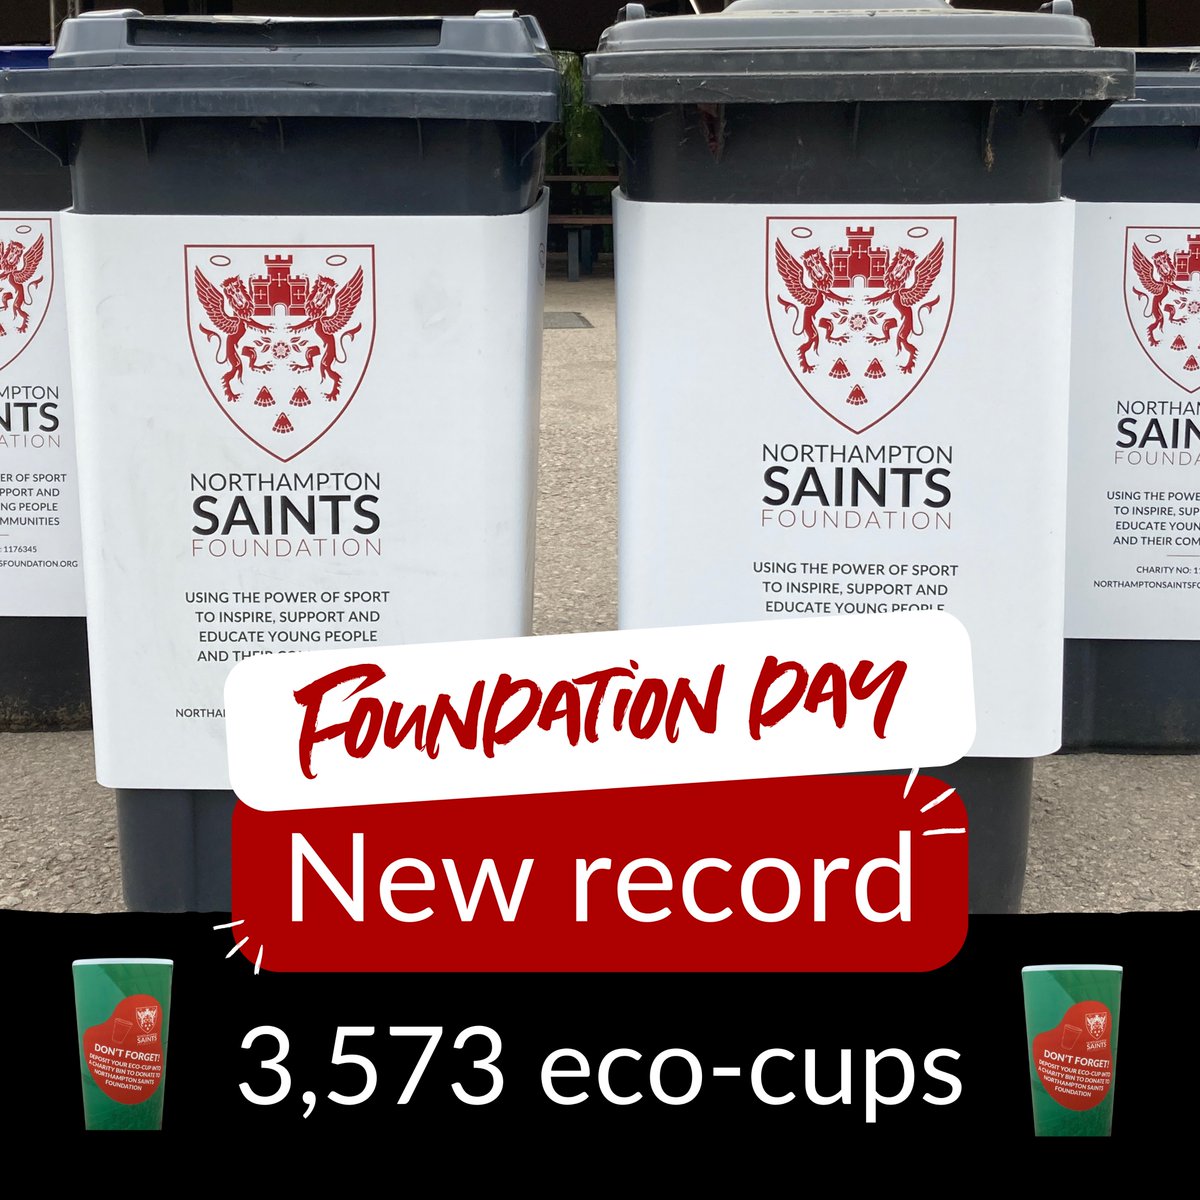 Thank you to everyone who donated their eco-cup! An incredible amount collected and you beat the total from last year, which stood at 1,928 👏 For more information and where to find our eco-cup bins on match-days, please head to our website!